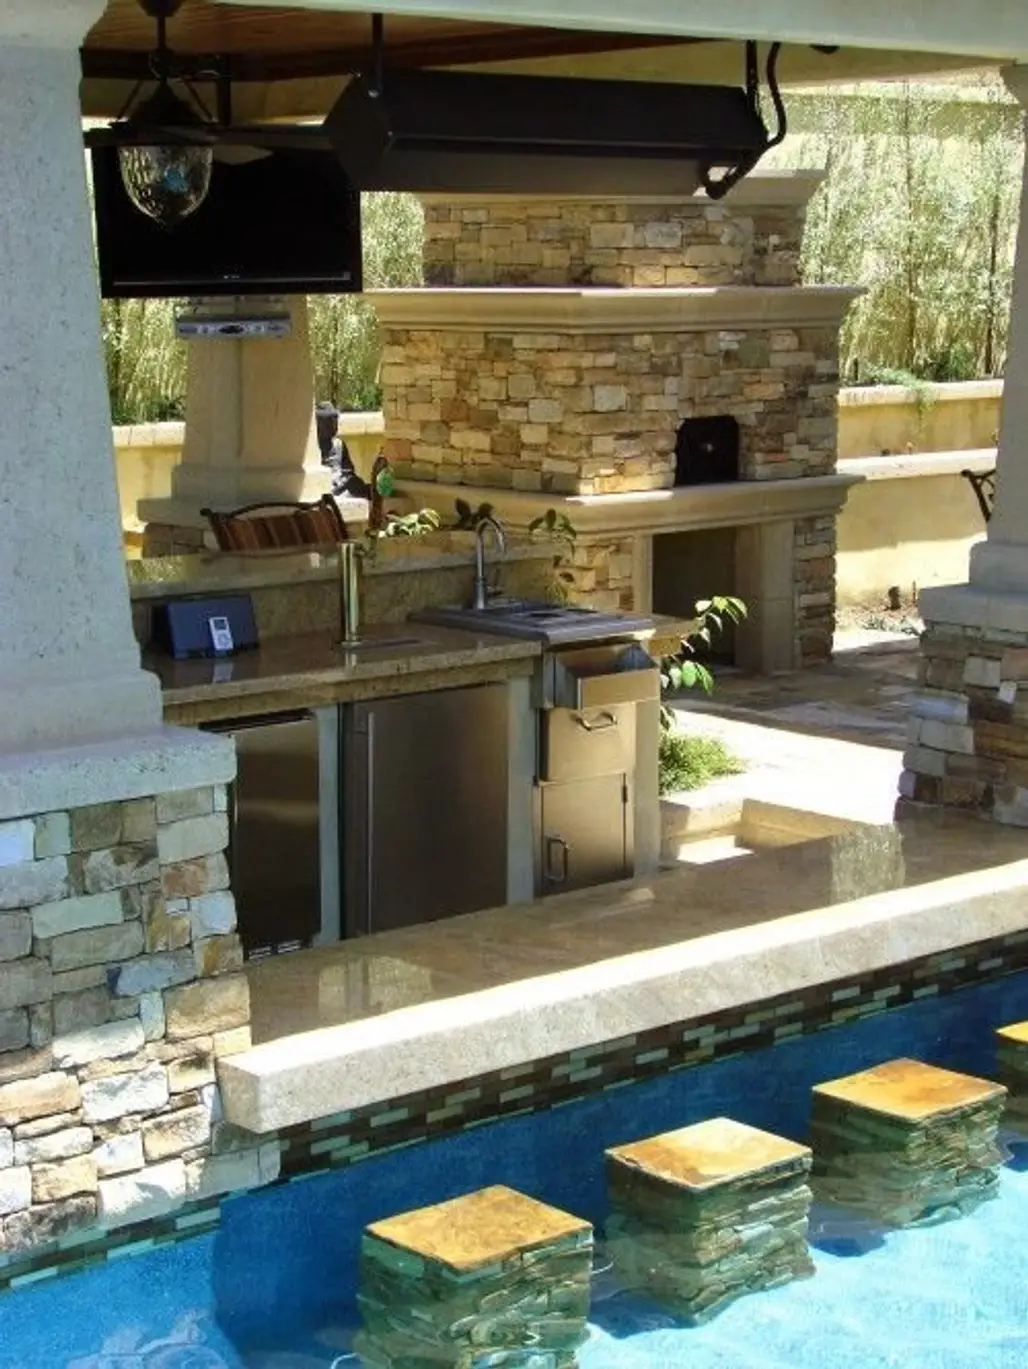 Swim-up Kitchen by the Pool